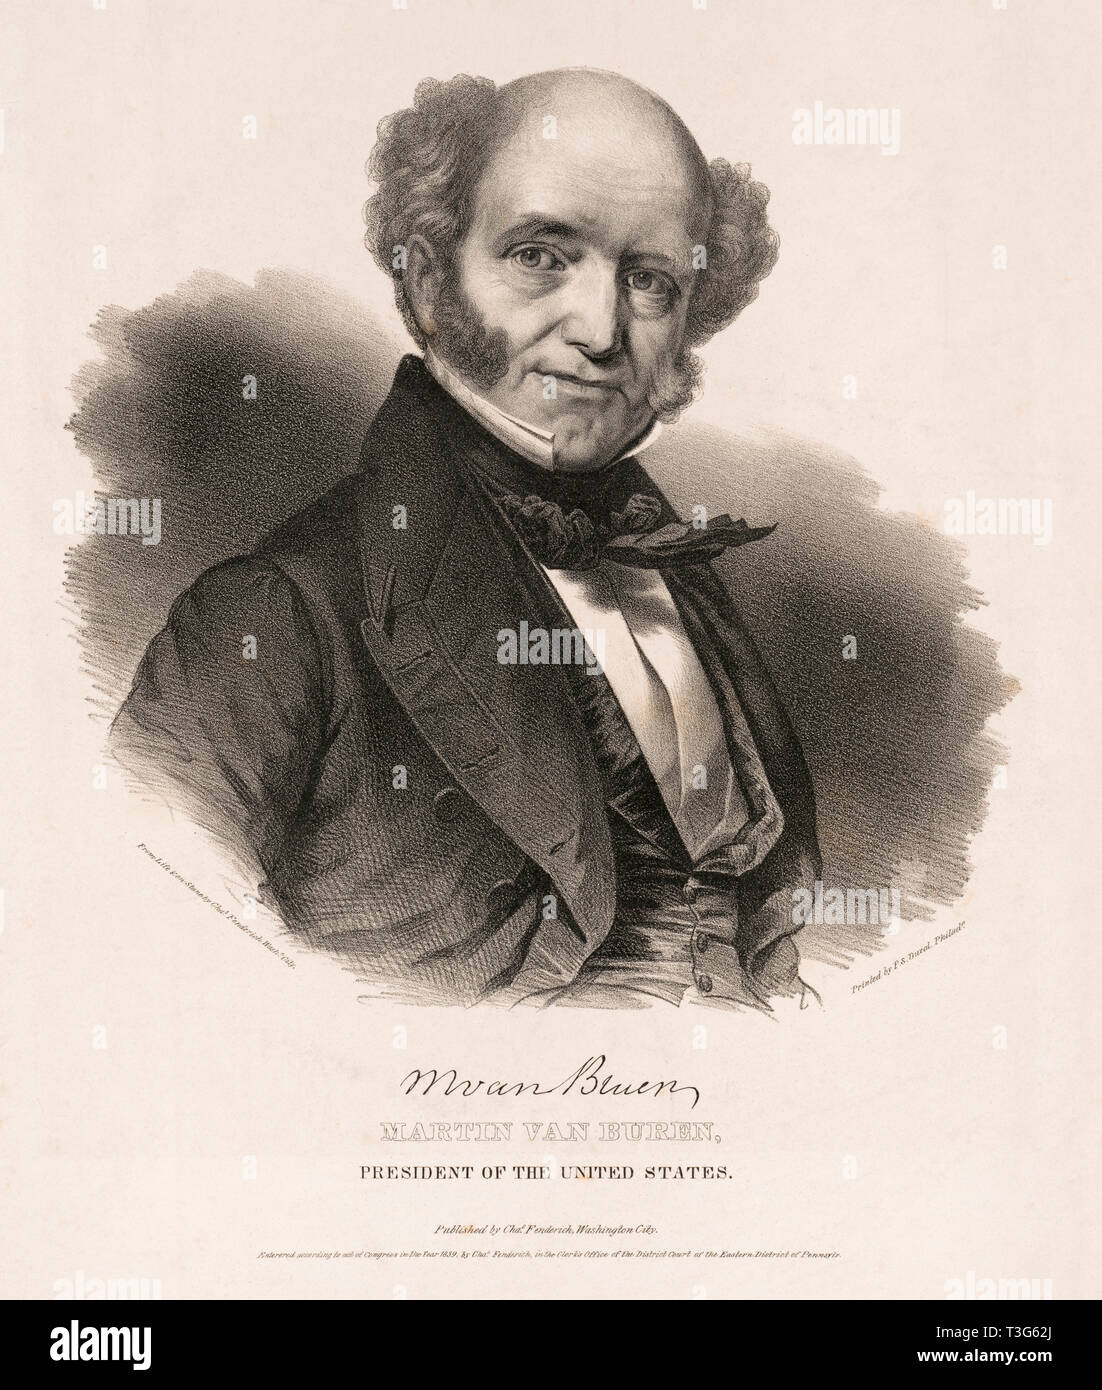 Martin Van Buren, President of the United States, Published by  Chs. Fenderich, Washington City, Printed by P.S. Duval, Philadelphia, 1839 Stock Photo